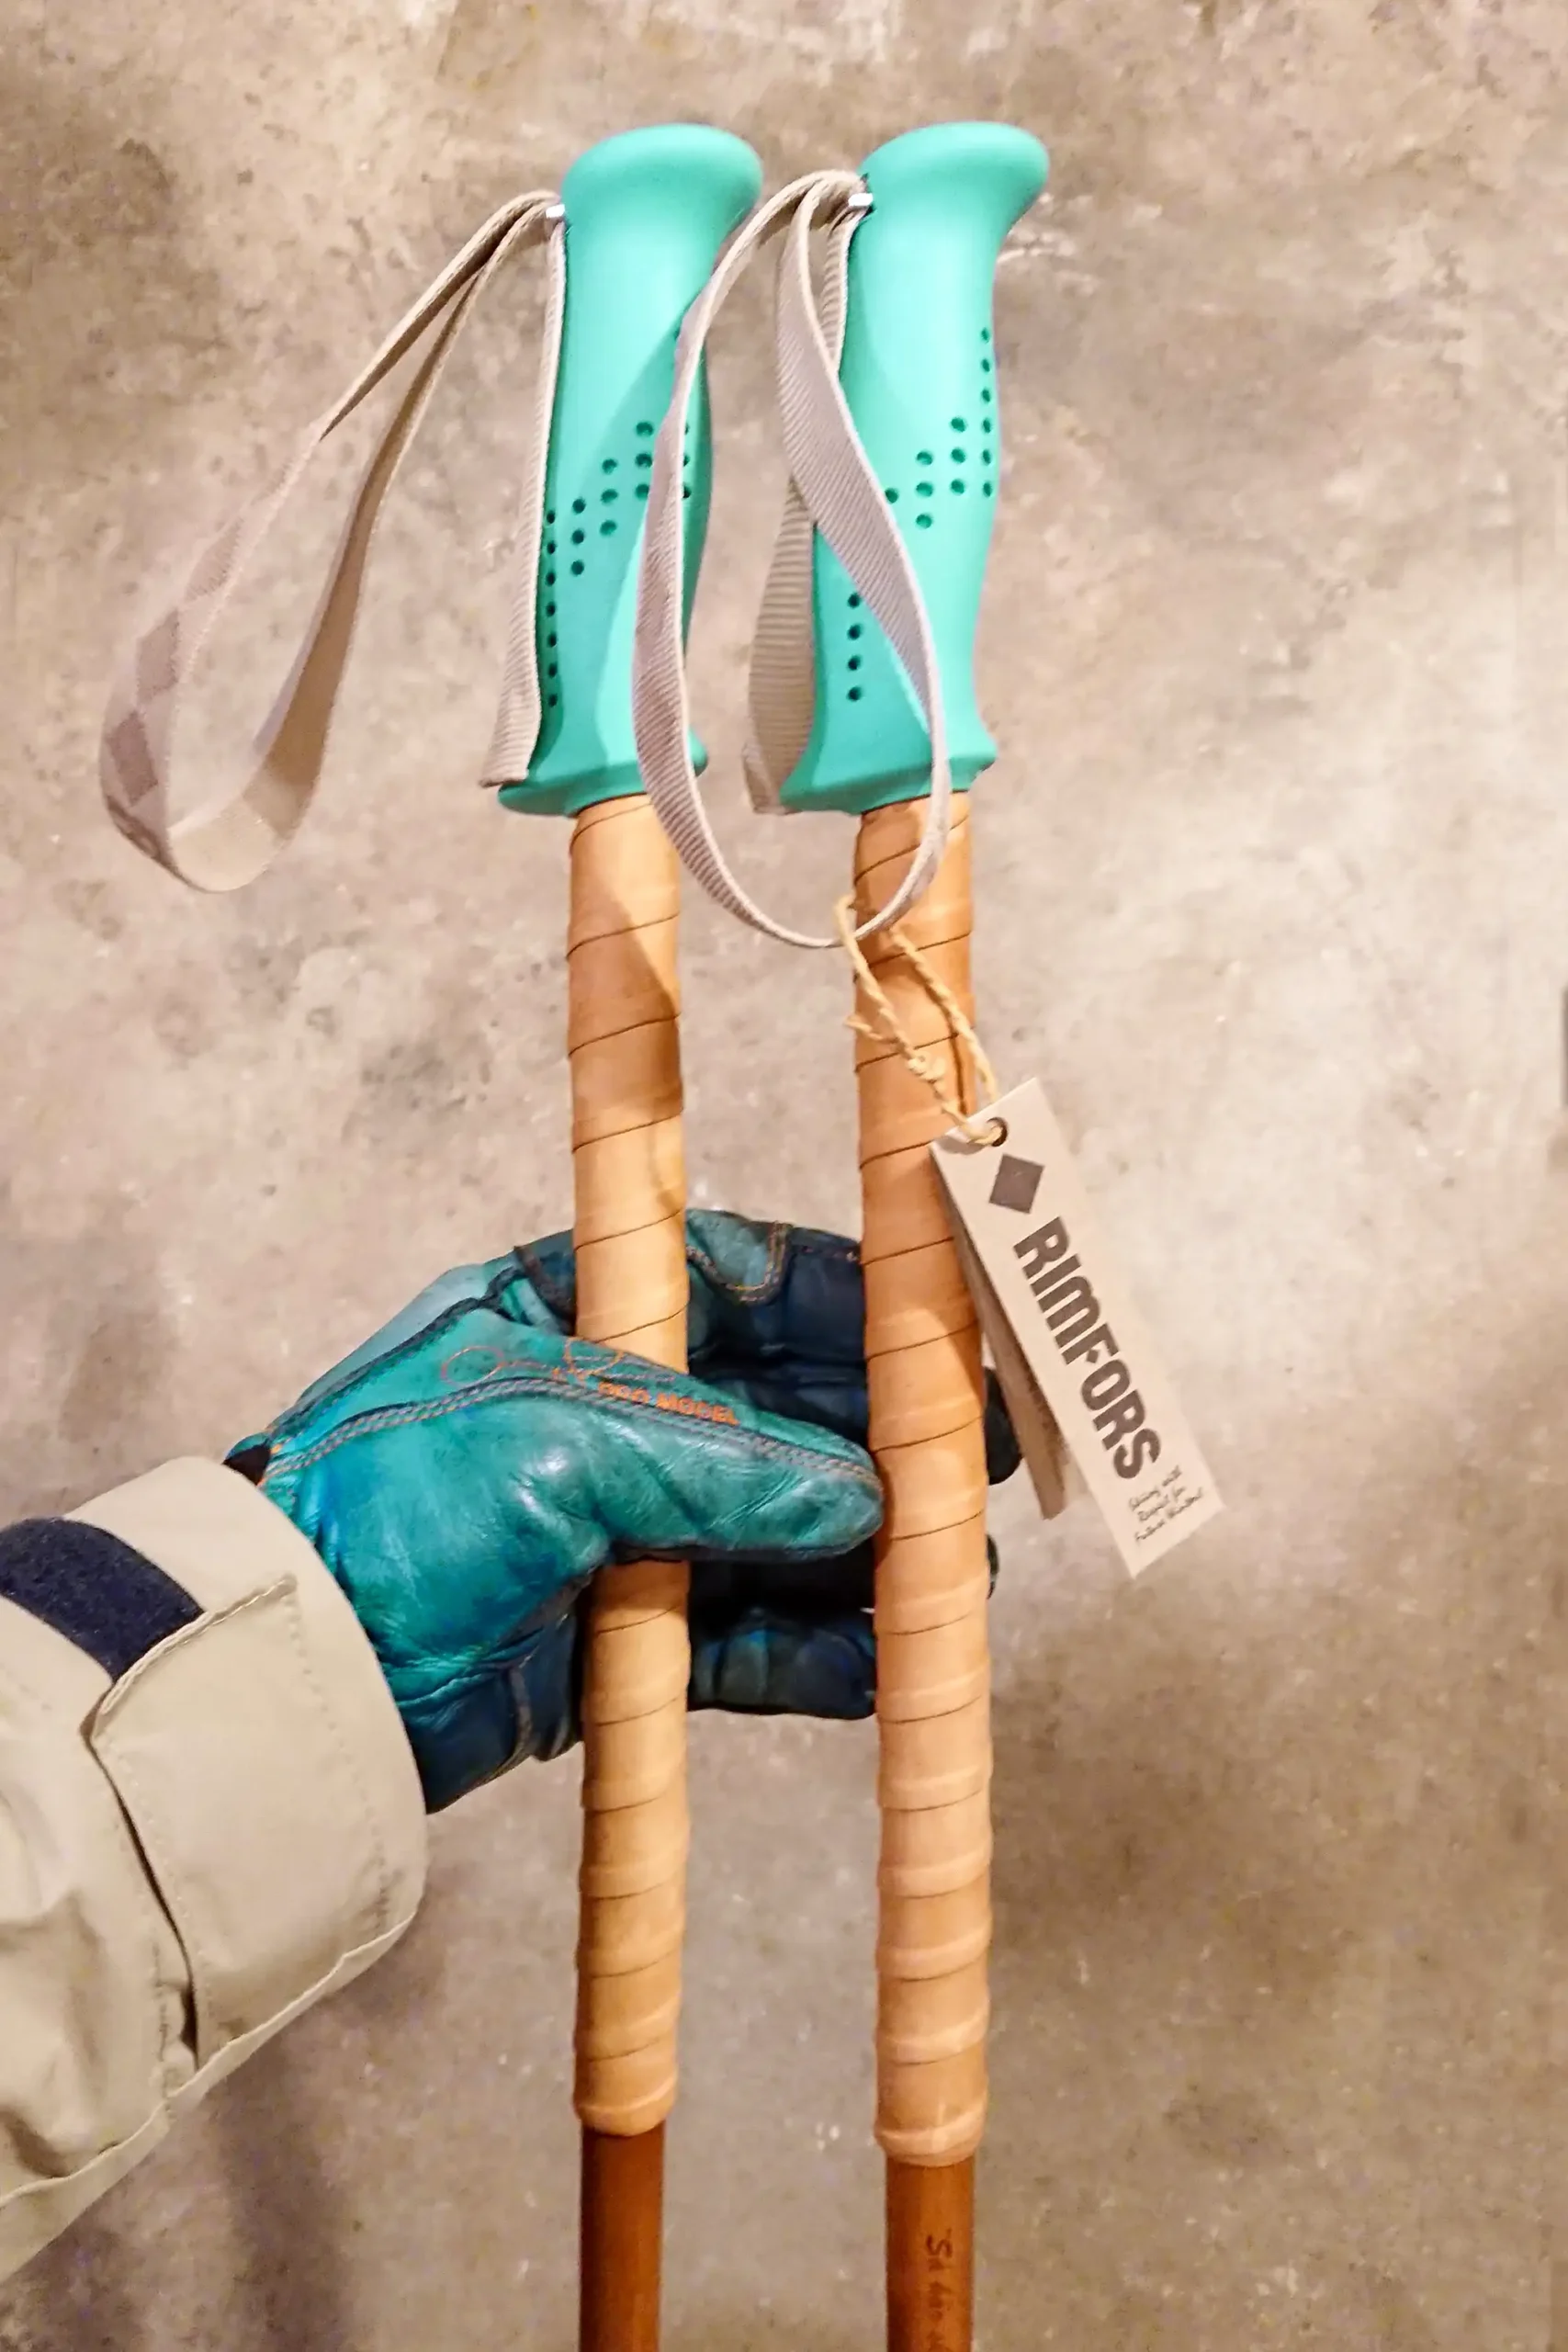 Turquoise bamboo ski poles with grip extensions of reindeer leather and dark tan Calcutta bamboo.